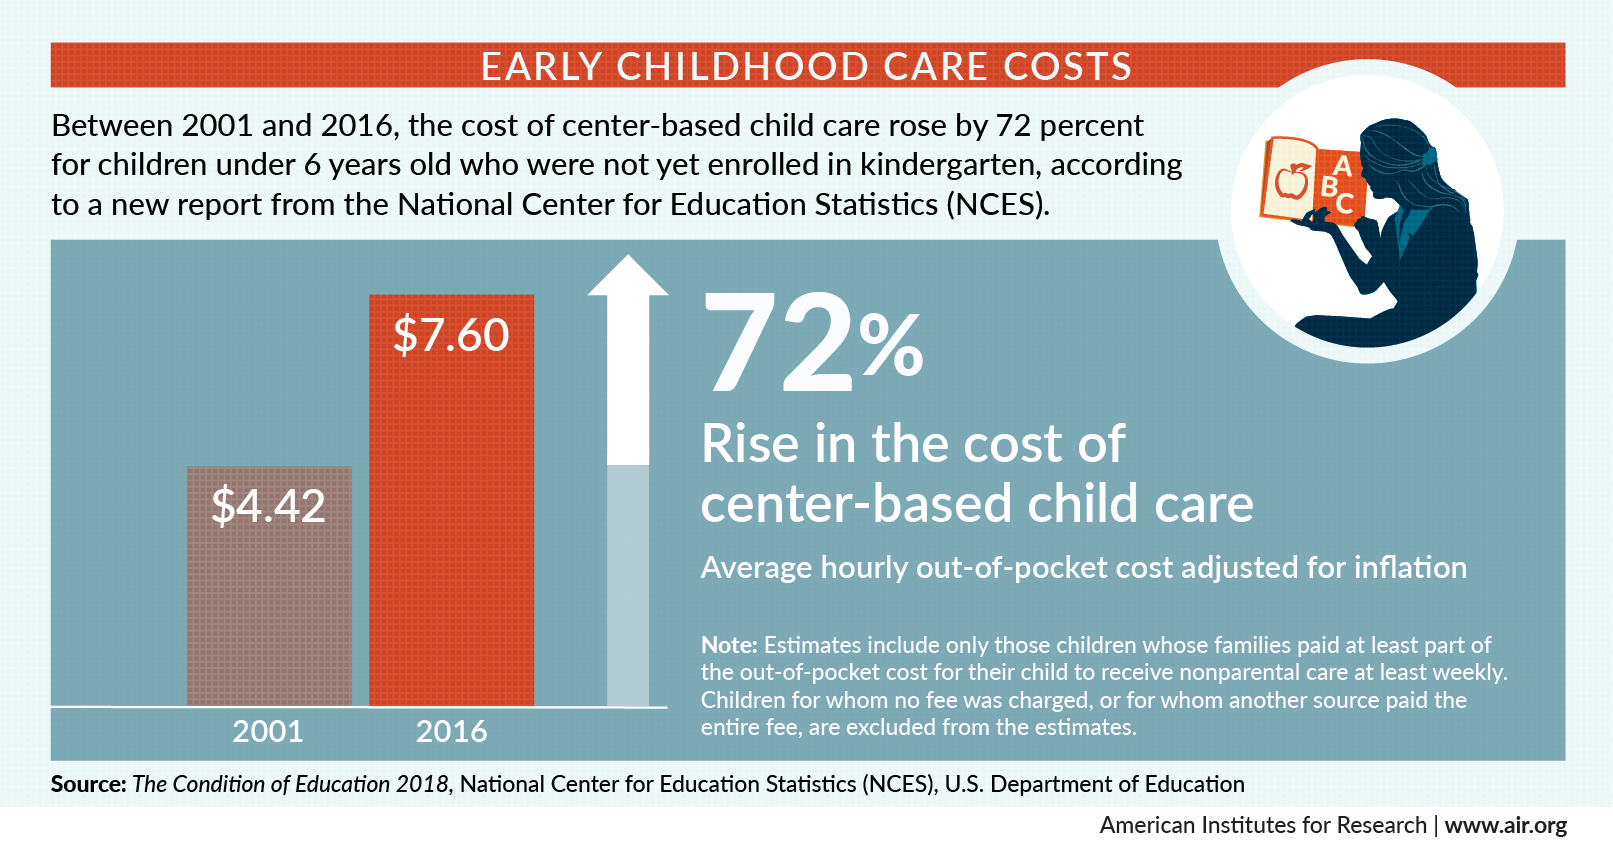 Infographic shows a 72% rise in center-based child care. The average hourly out-of-pocket cost adjusted for inflation: $4.42 in 2001, and $7.60 in 2016. 